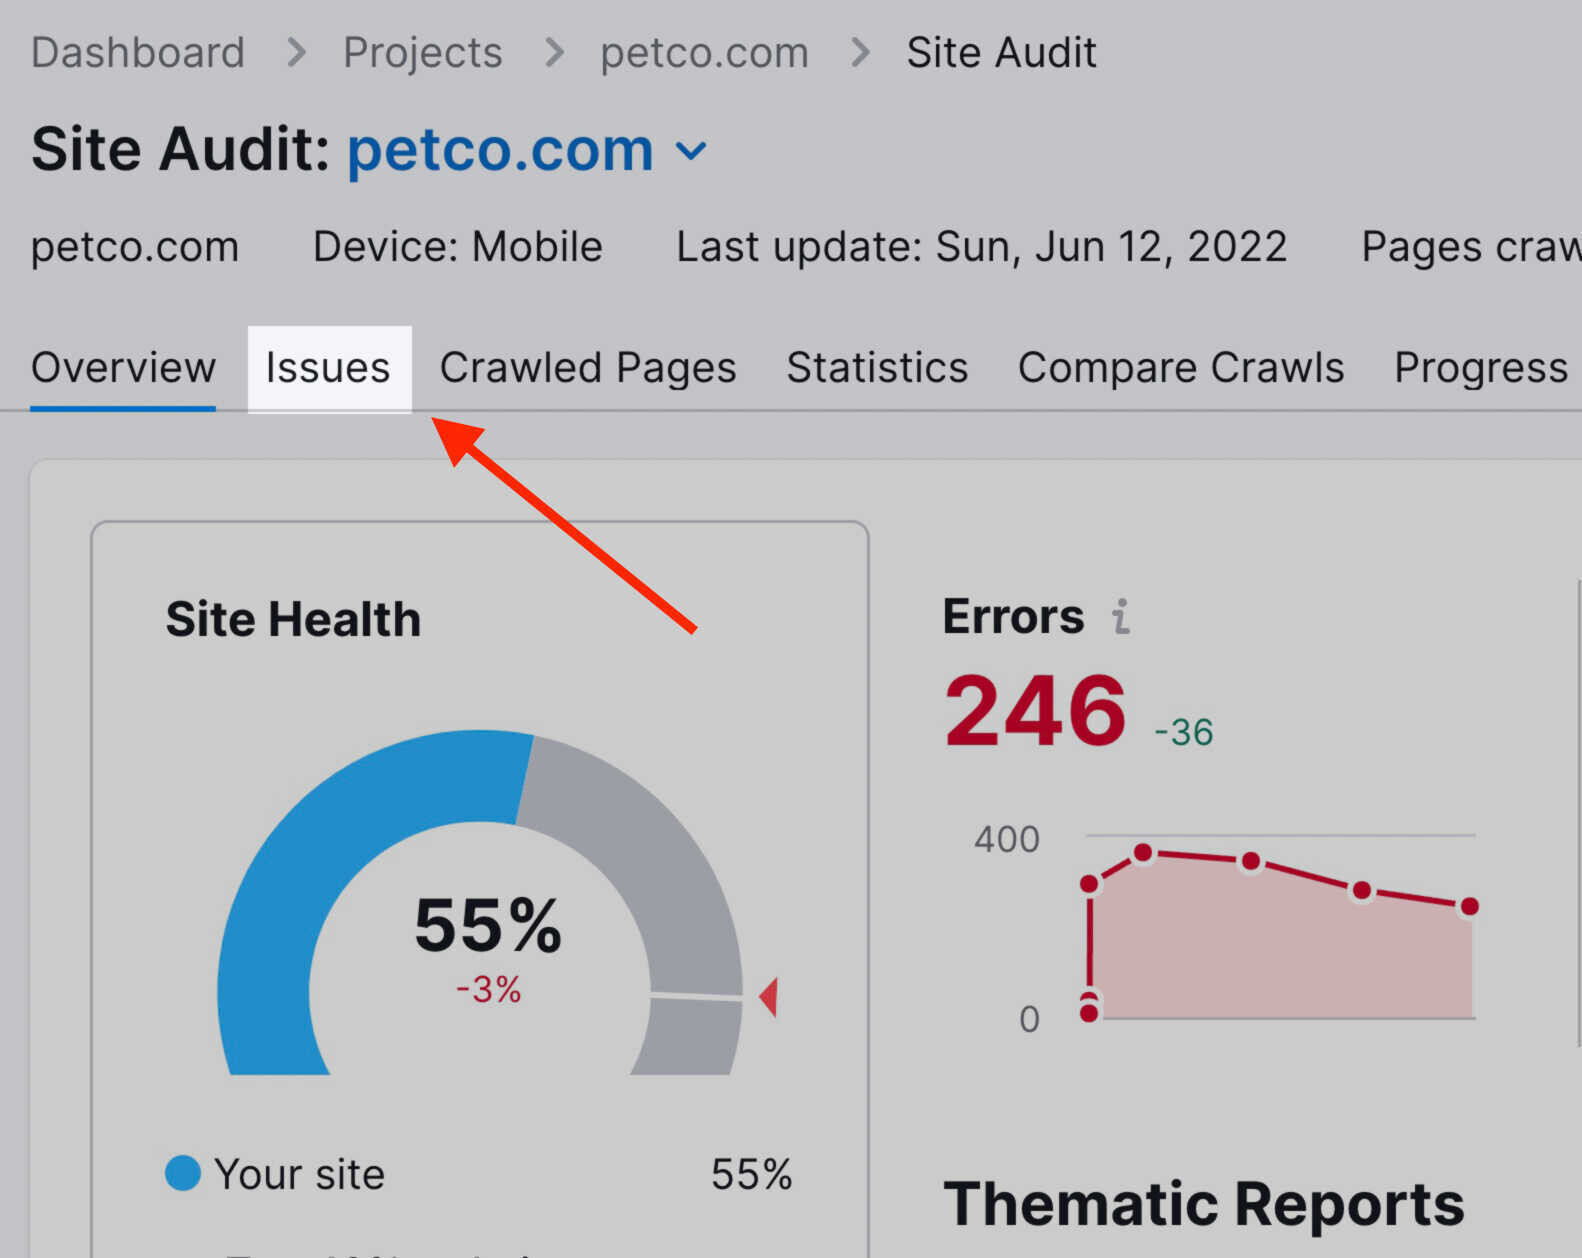 Site Audit Issues tab